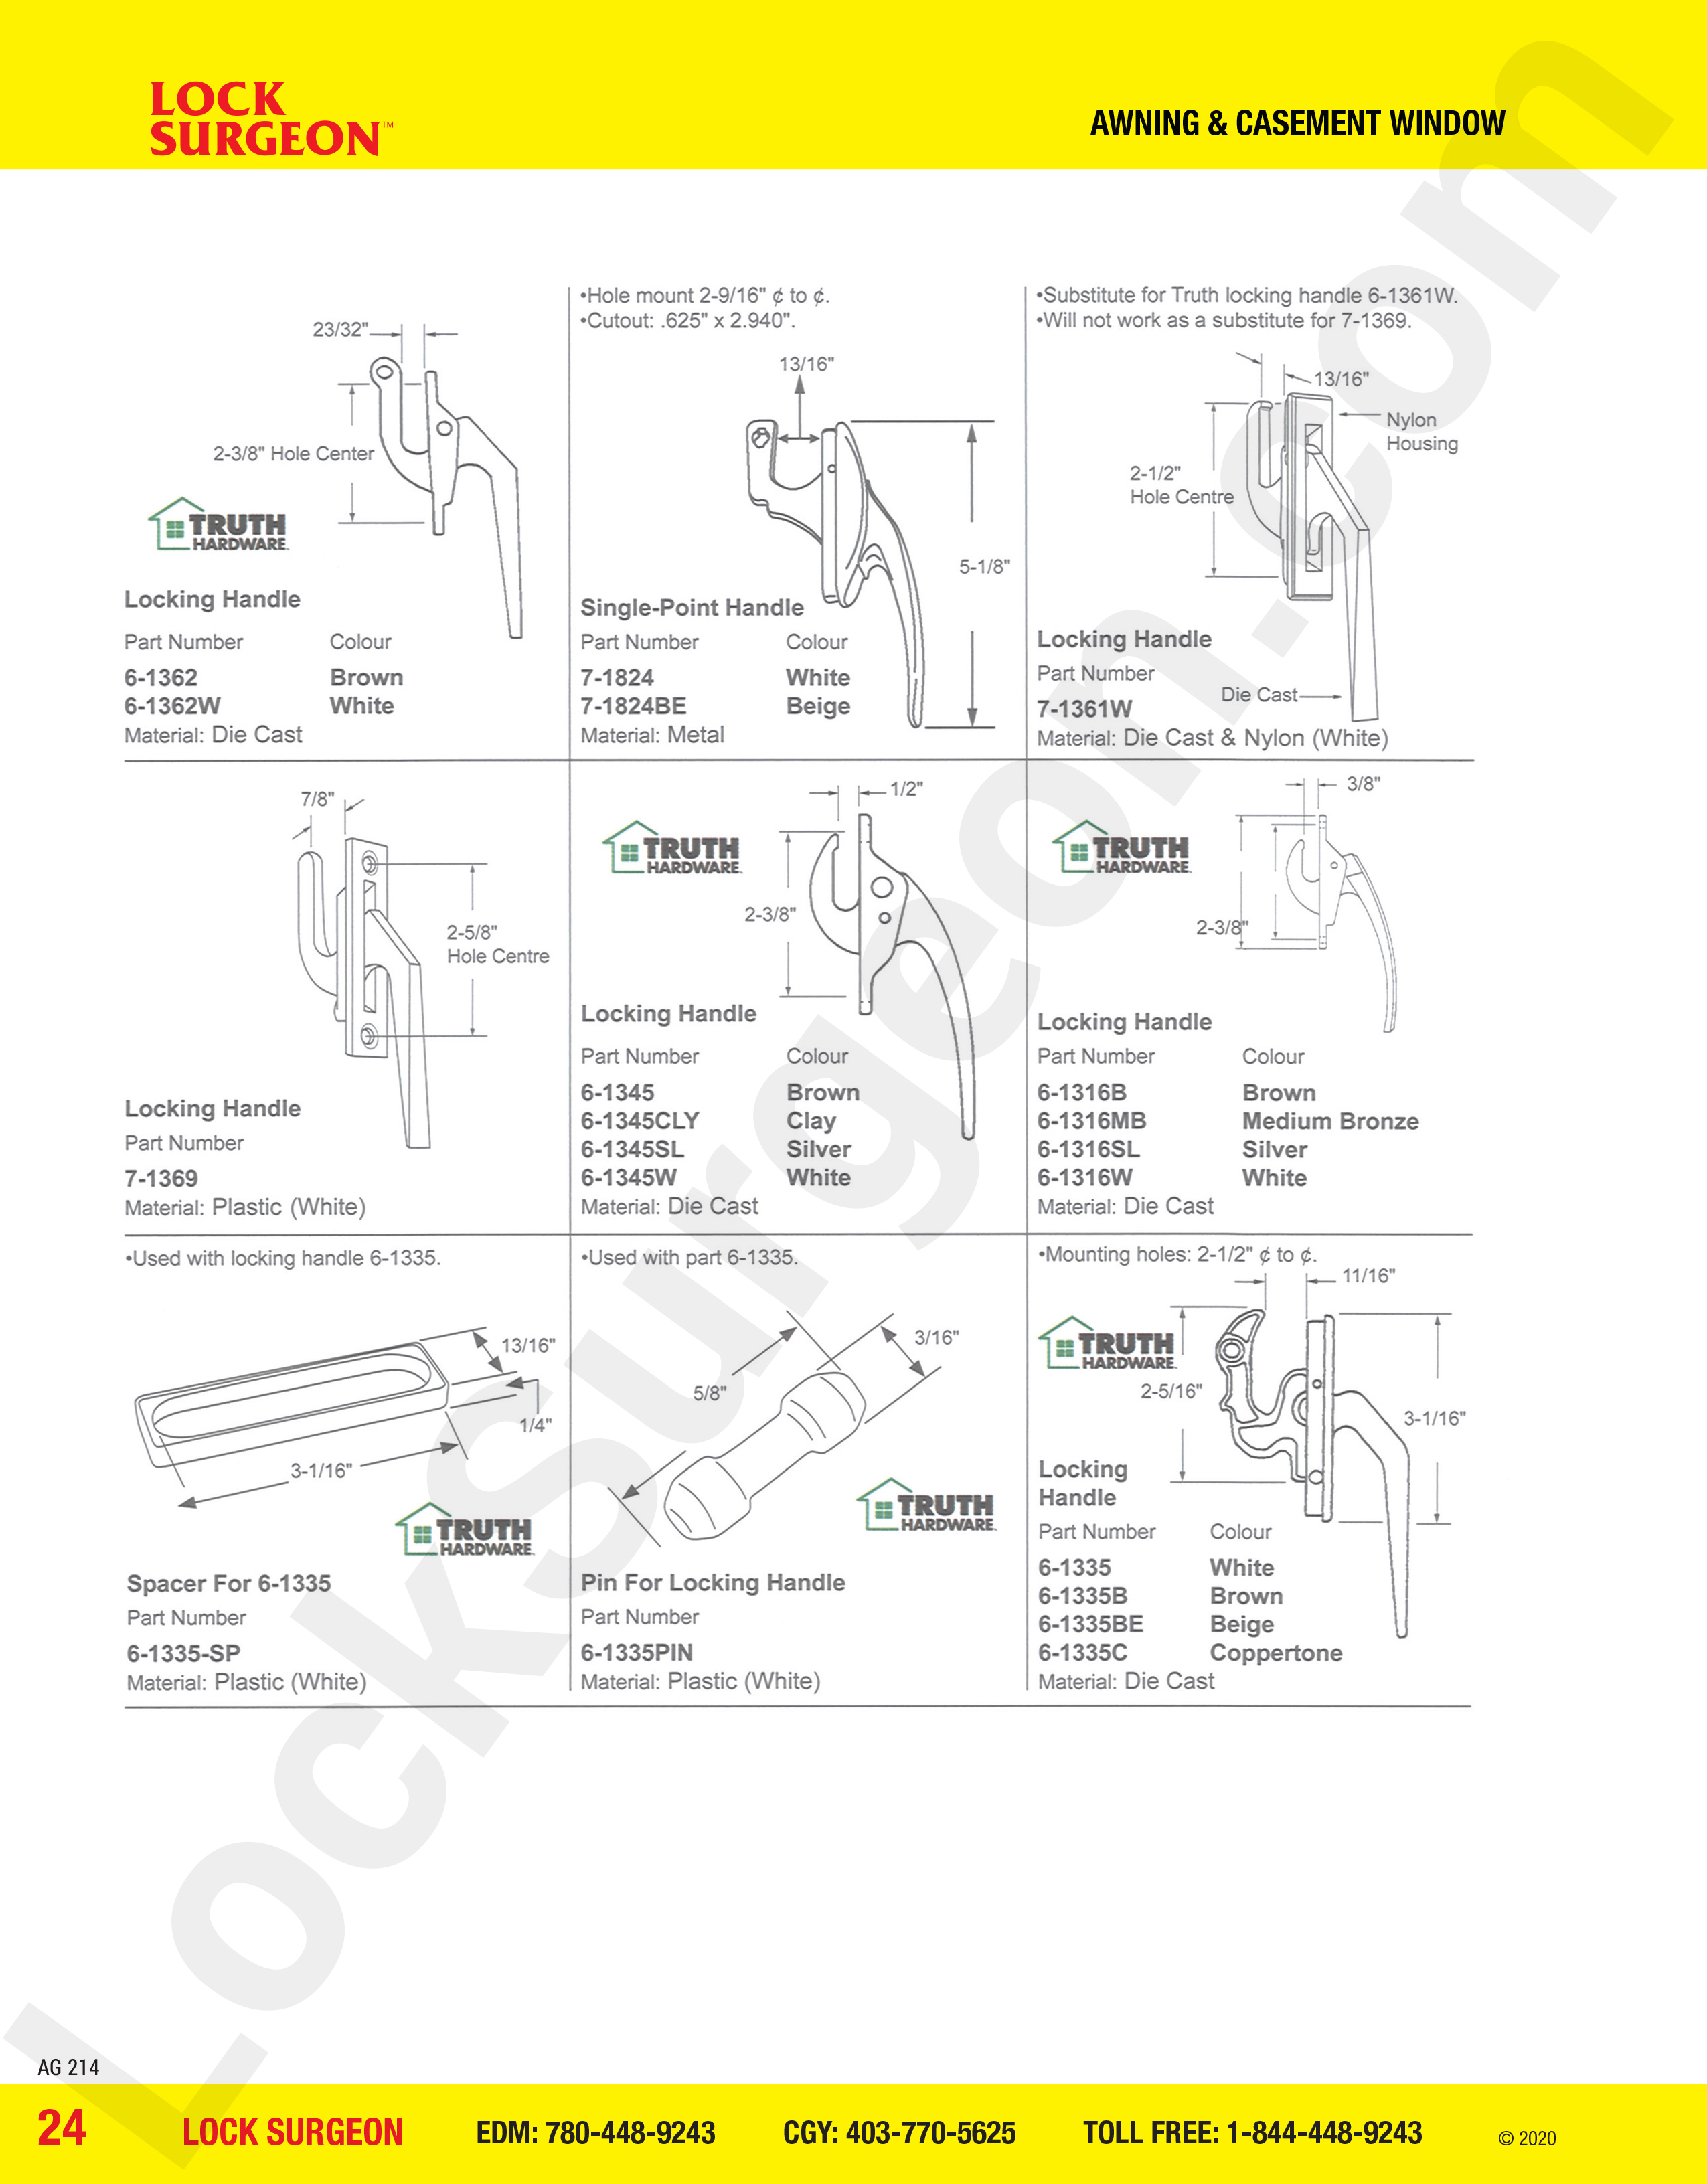 awning and casement window parts for locking handles